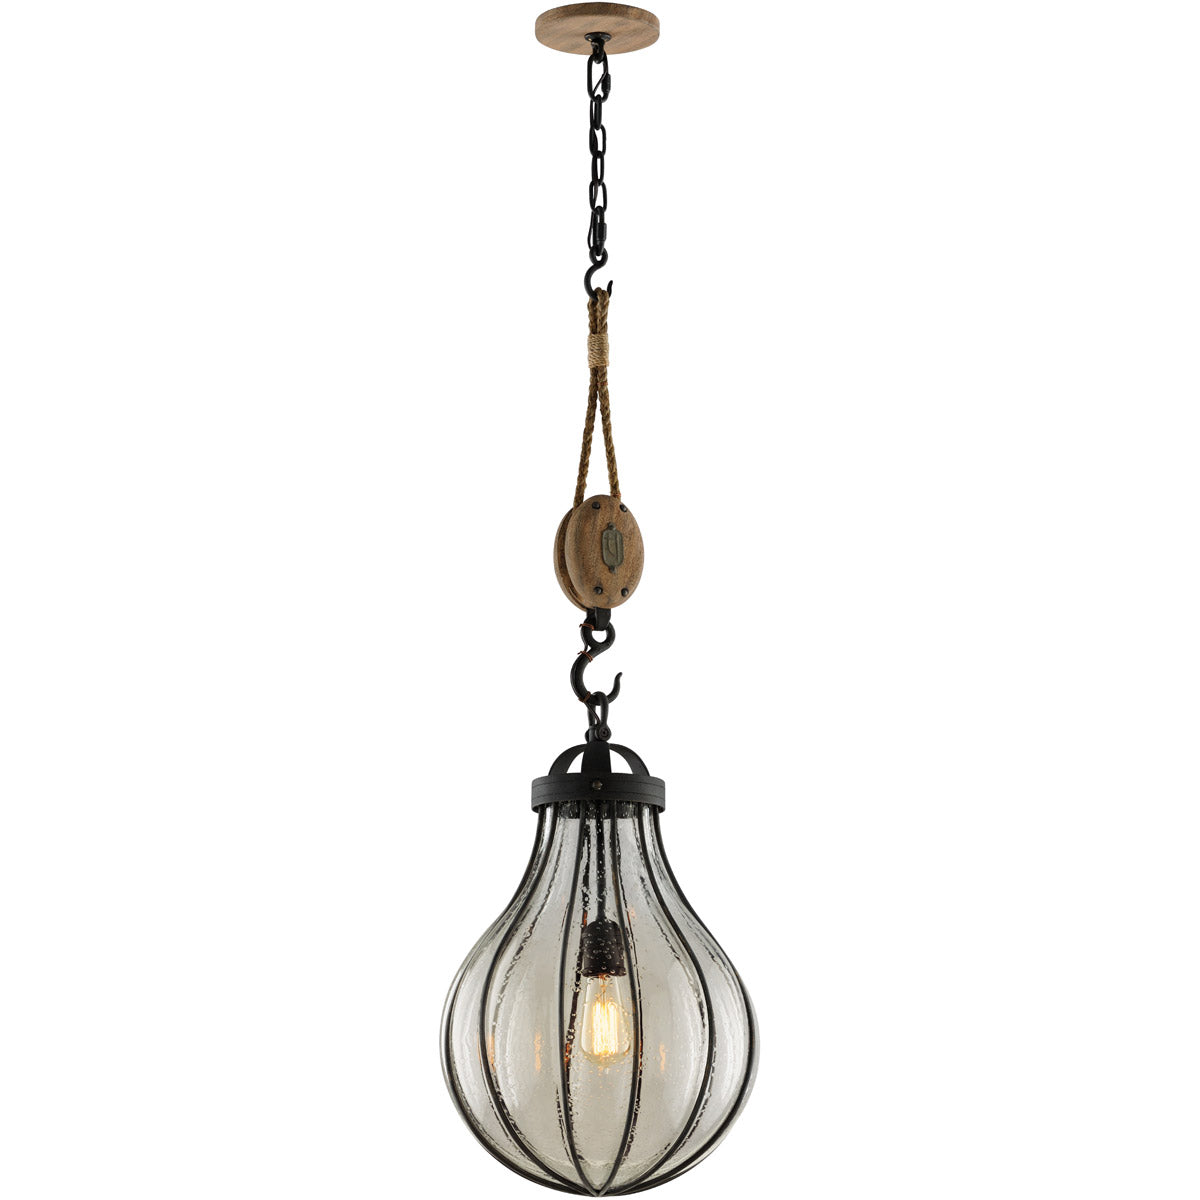 Vintage Iron with Rustic Wood and Hand Blown Seedy Glass Shade Pendant